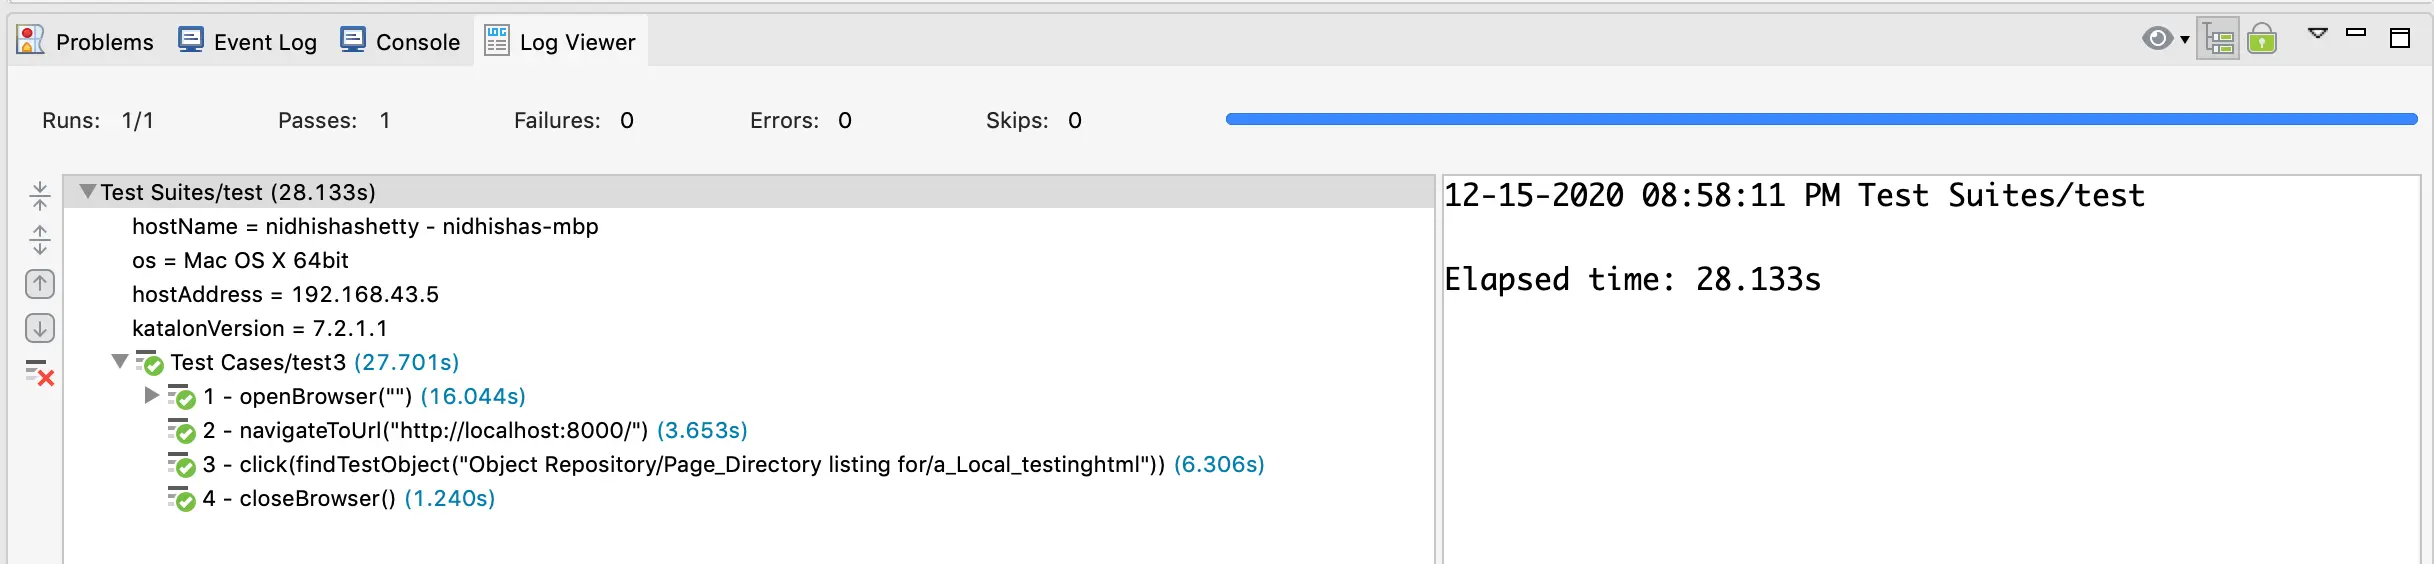 If the test runs successfully on BrowserStack, the Log Viewer tab in Katalon Studio displays the test results